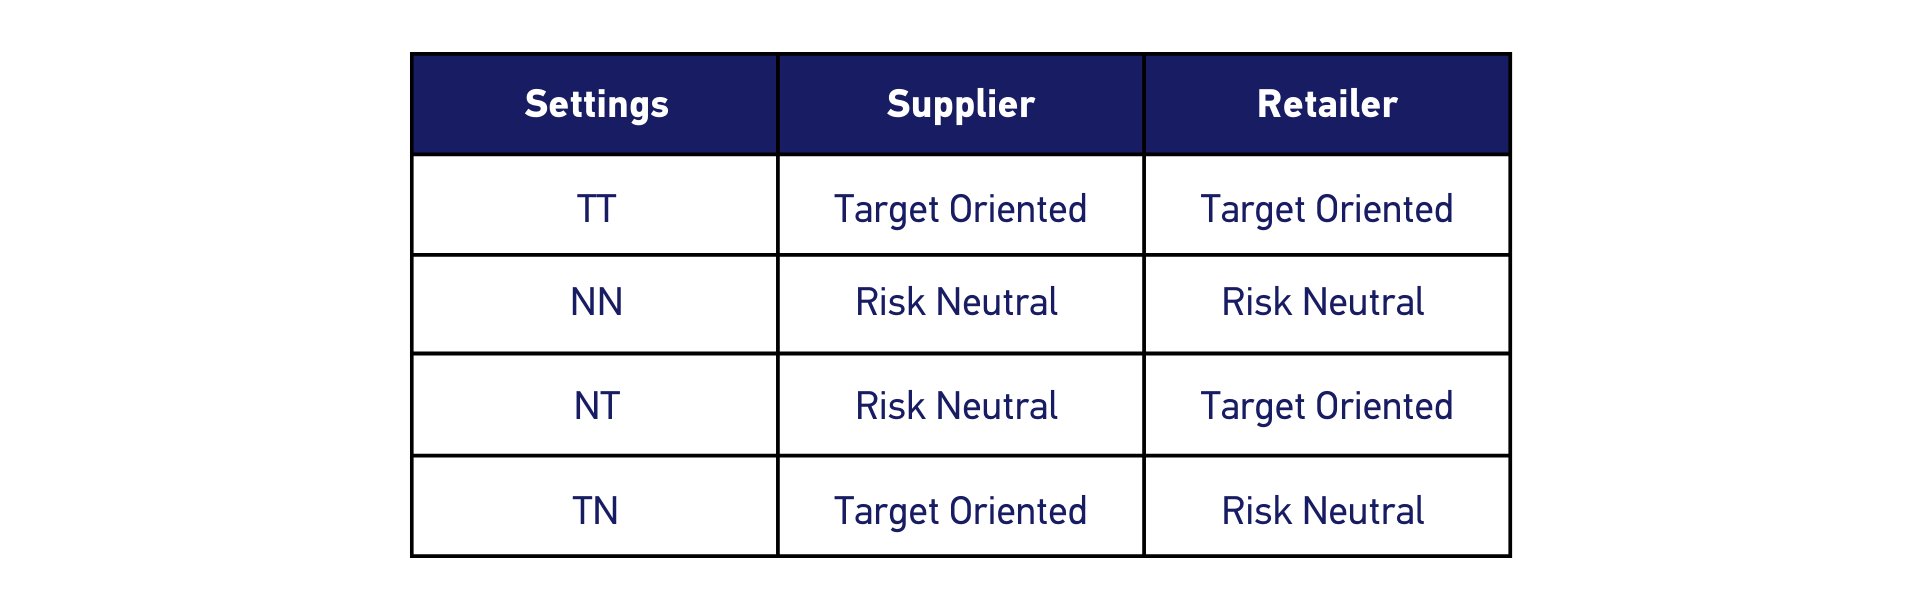 Table showing type of suppliers and retailers